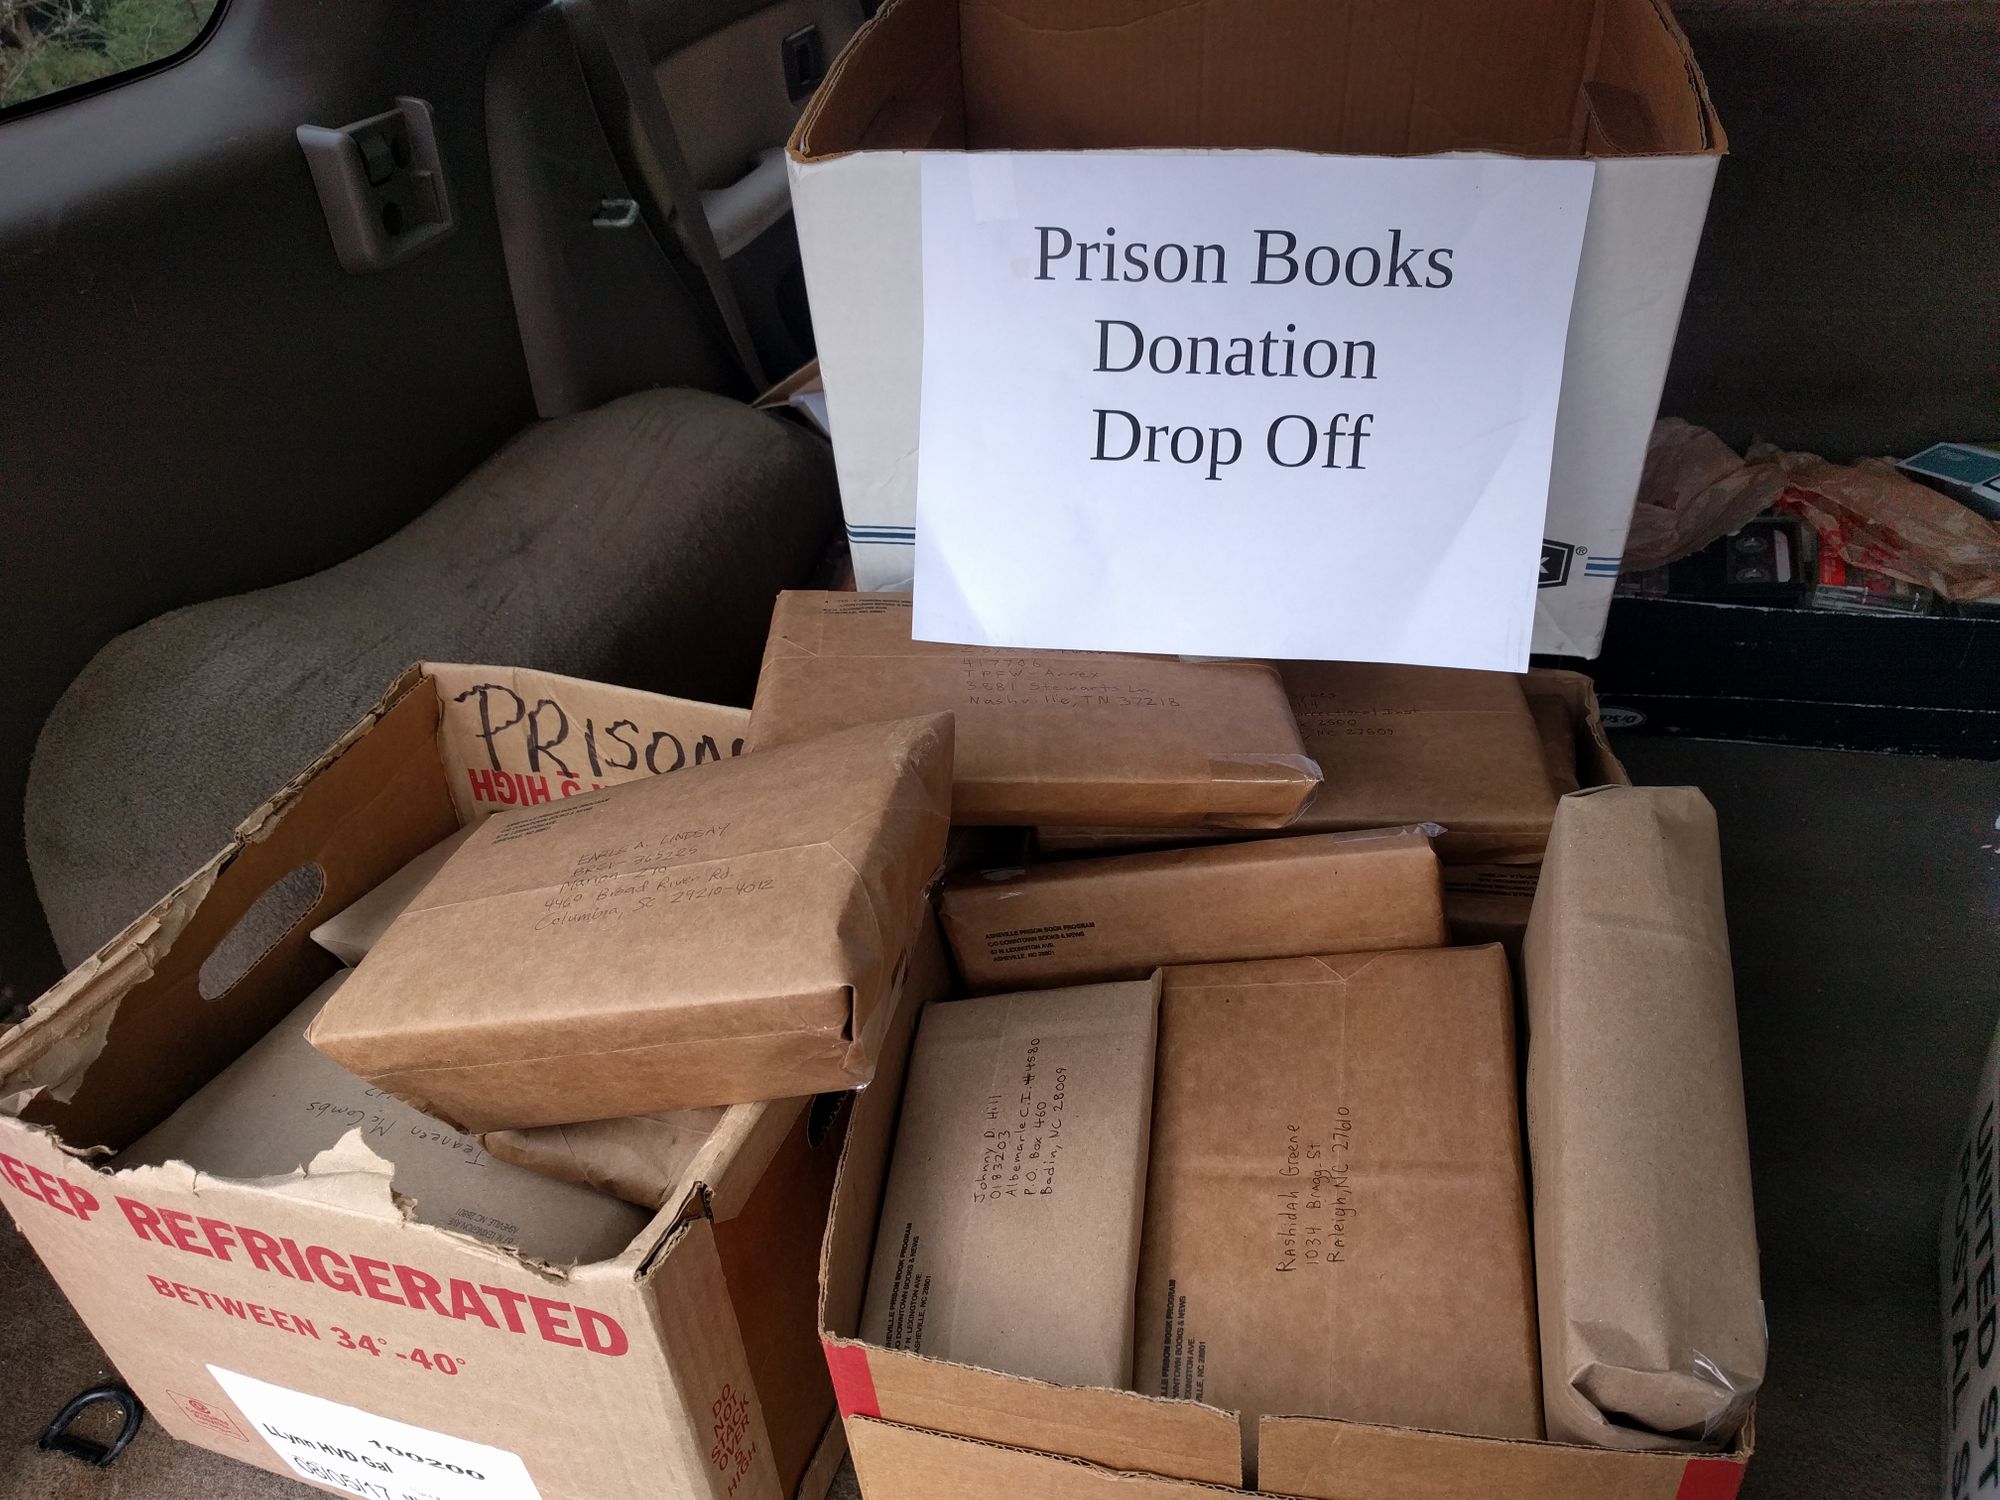 Help us get these books into people's hands!